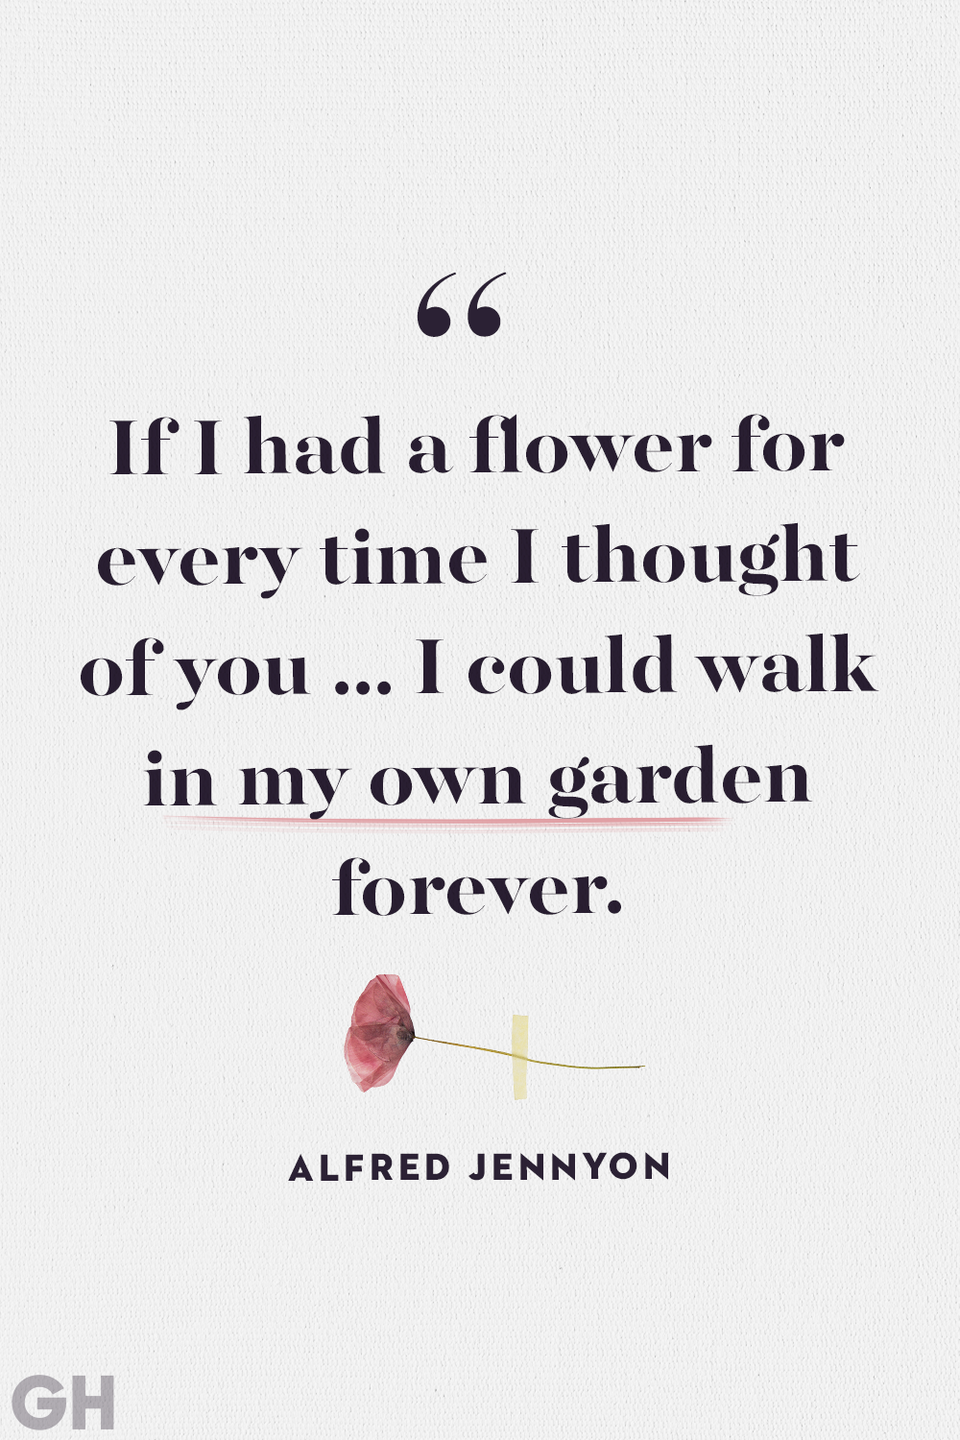 <p>If I had a flower for every time I thought of you ... I could walk in my own garden forever.</p>